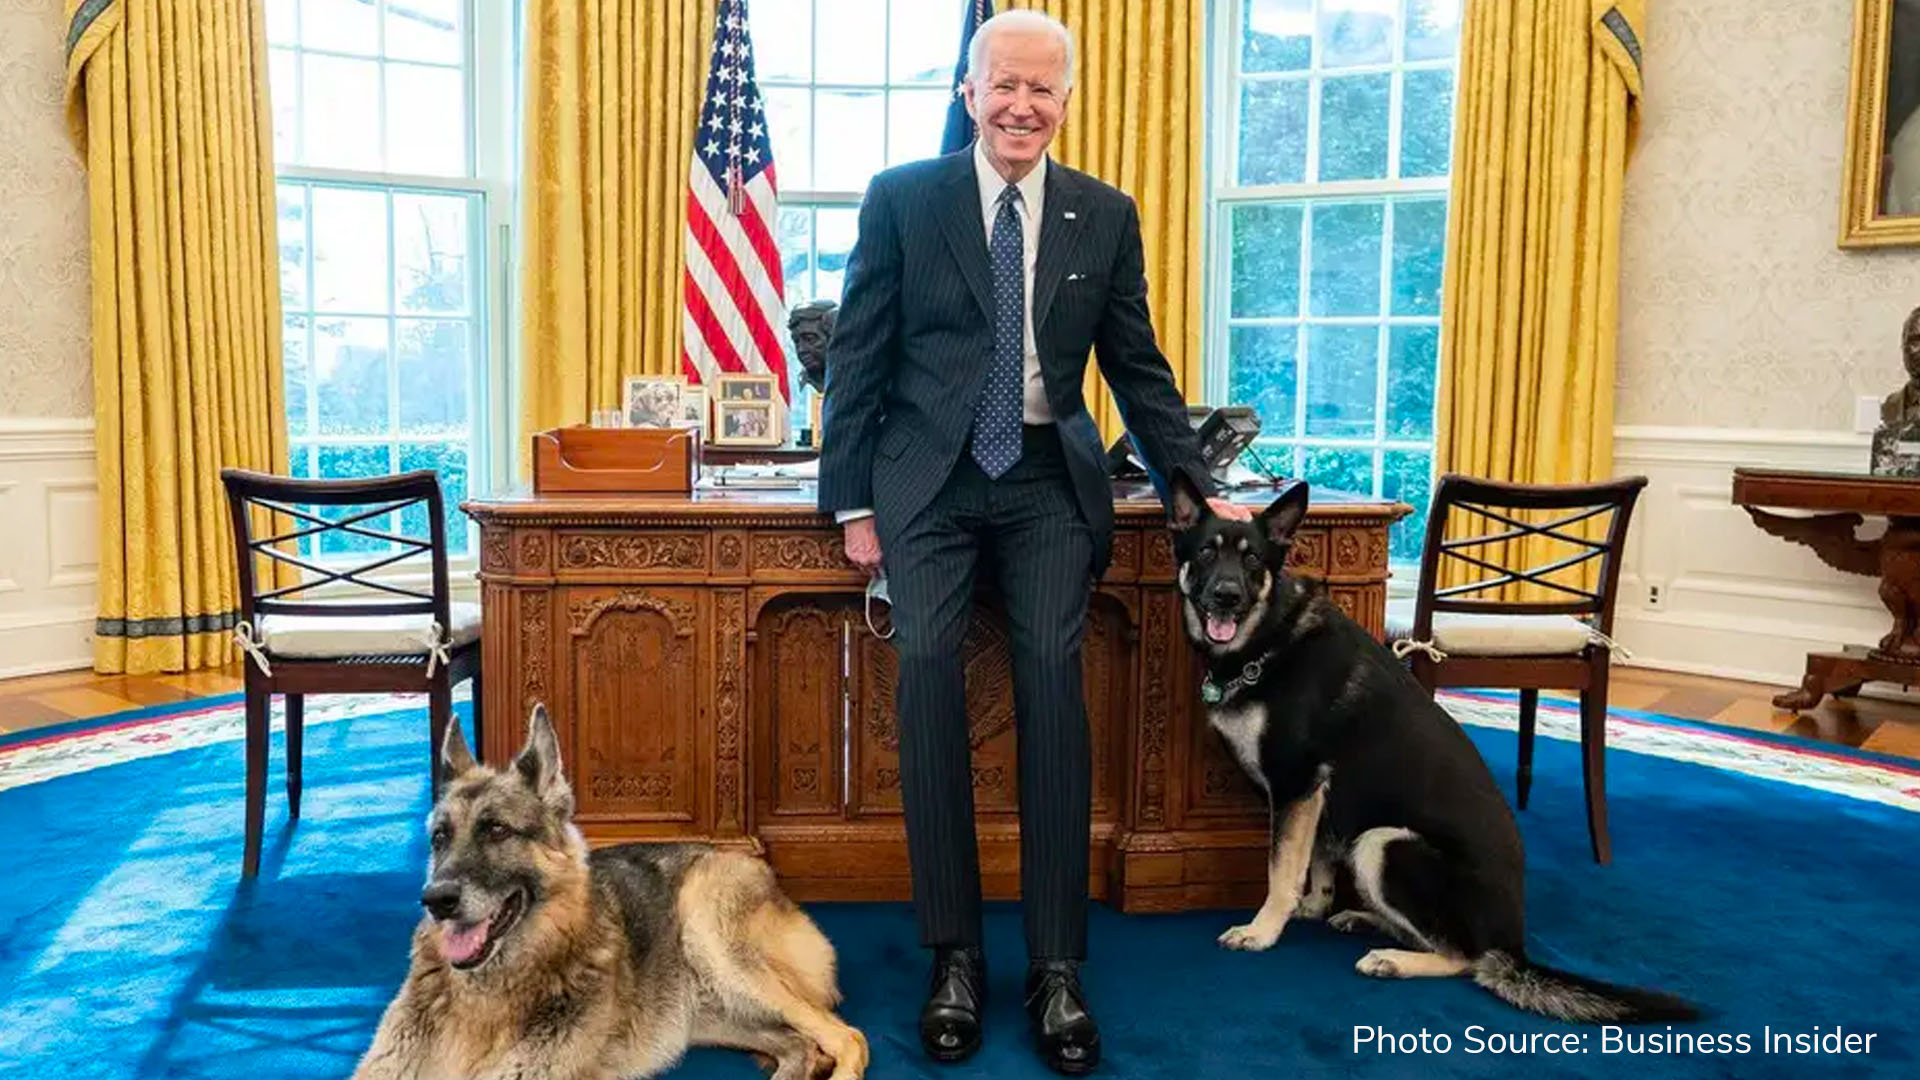 Bidens’ dog Major involved in another biting incident